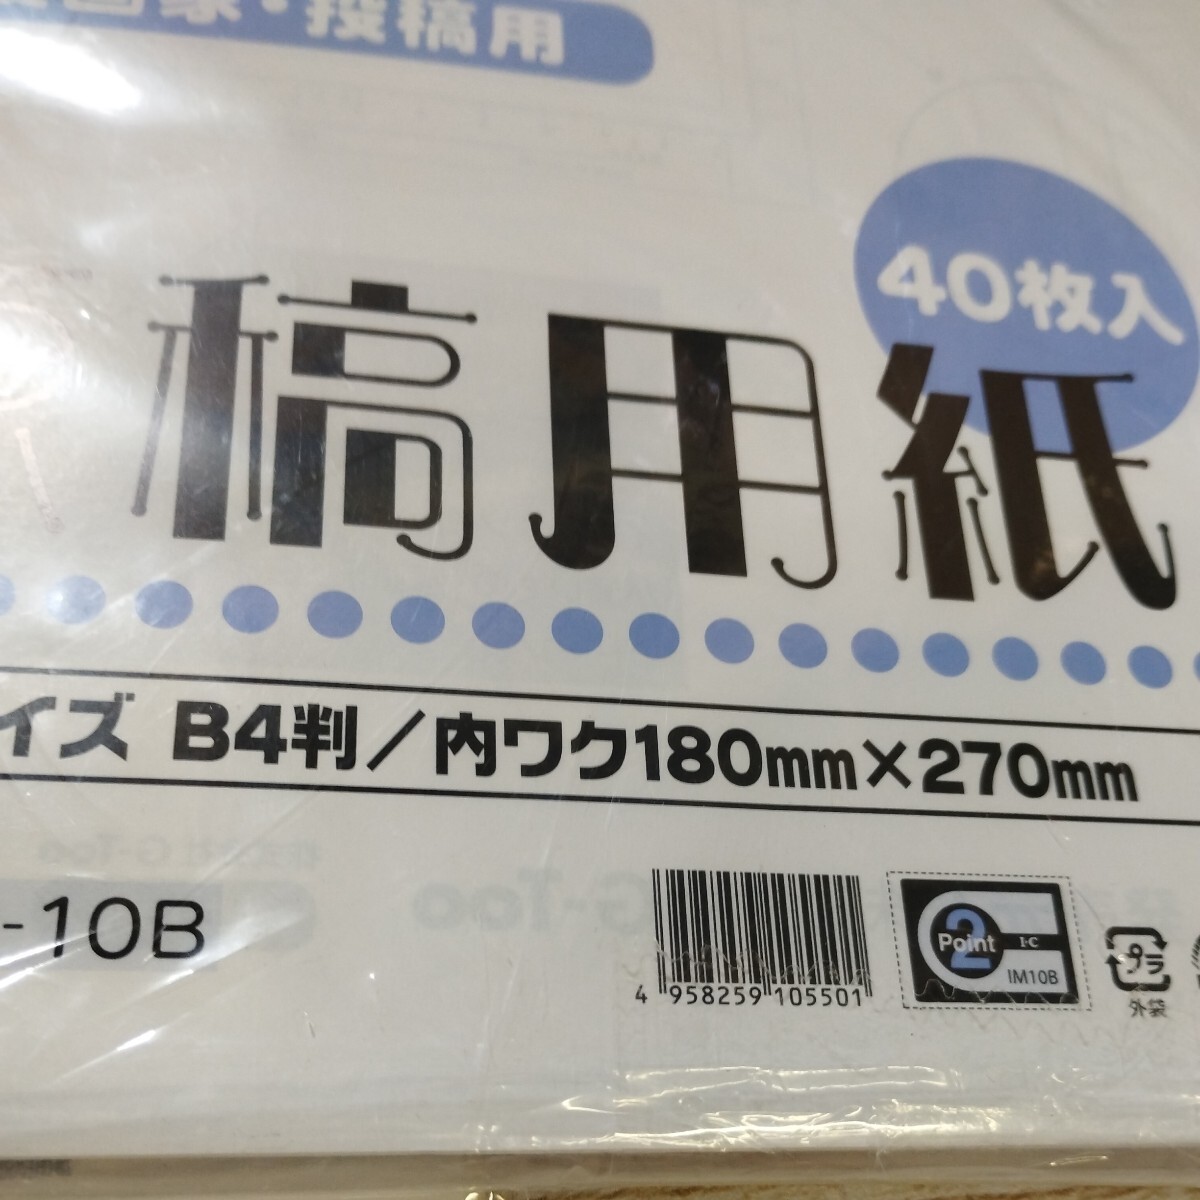 0604y3011*1 jpy start *[ set ]* I si-(IC) manga manuscript paper B4 light 110kg IM-10B* manga manuscript paper *A4 stamp ** including in a package un- possible *